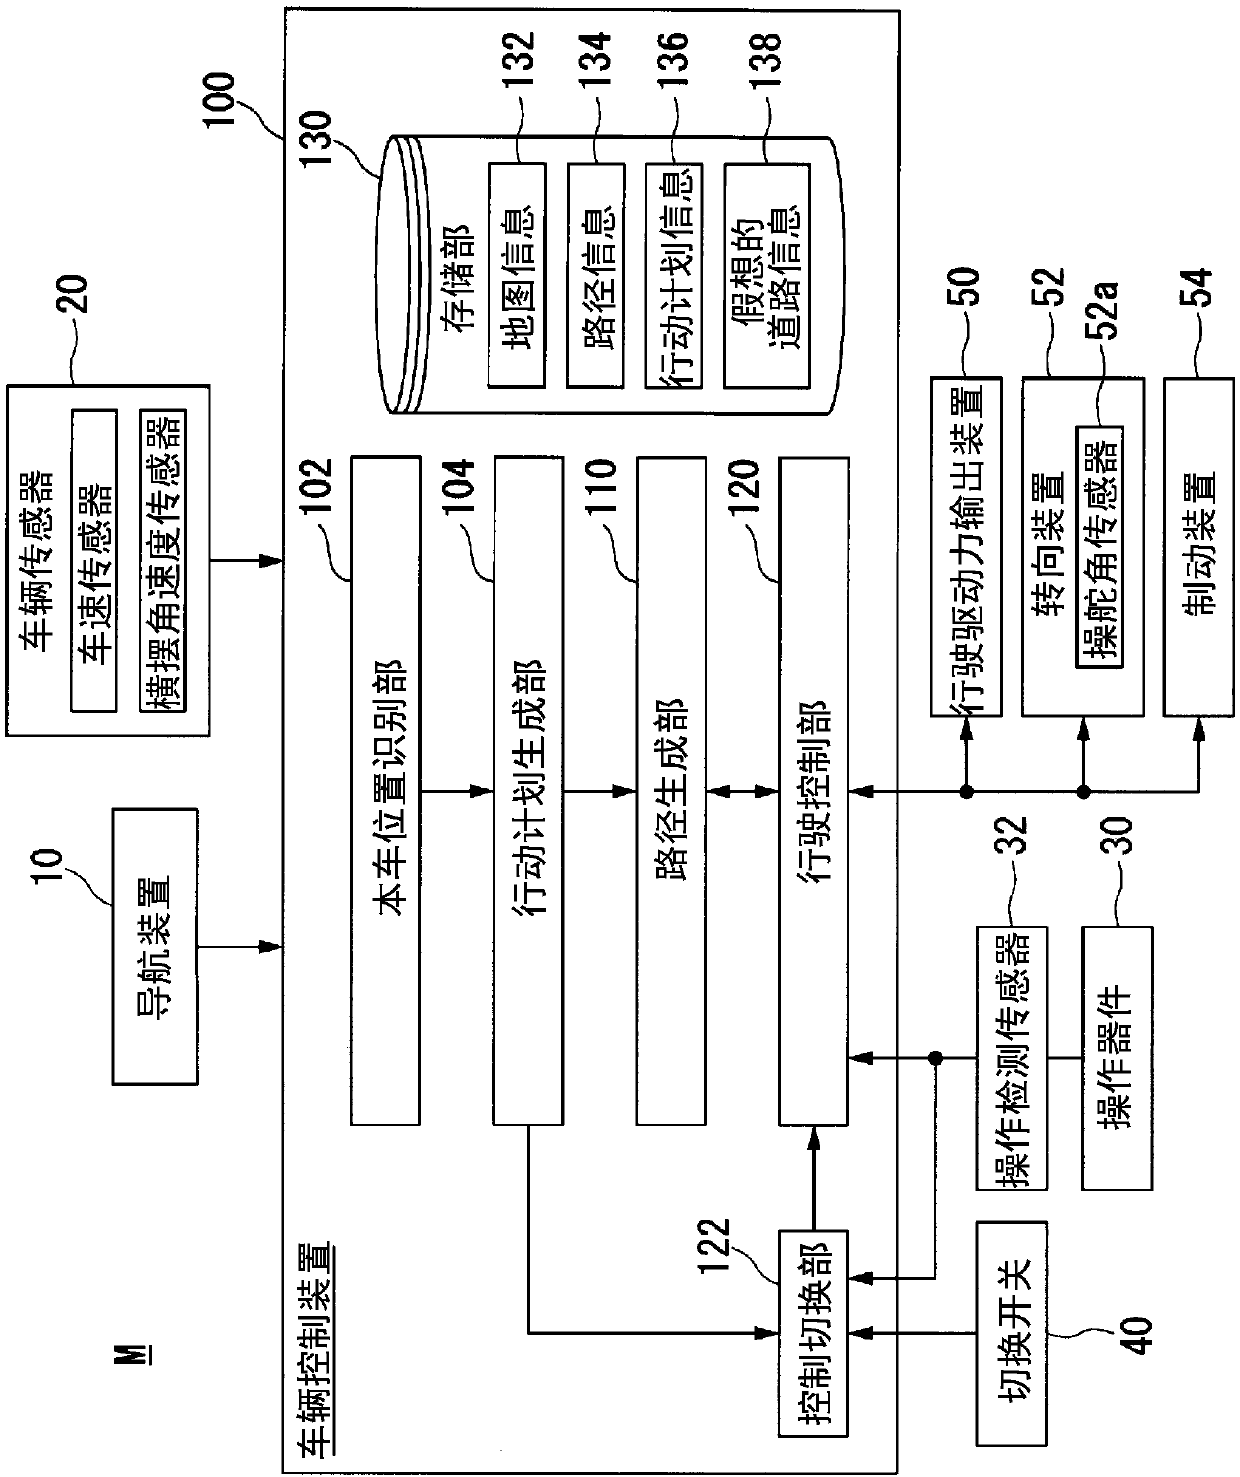 Route generator, route generation method, and route generation program